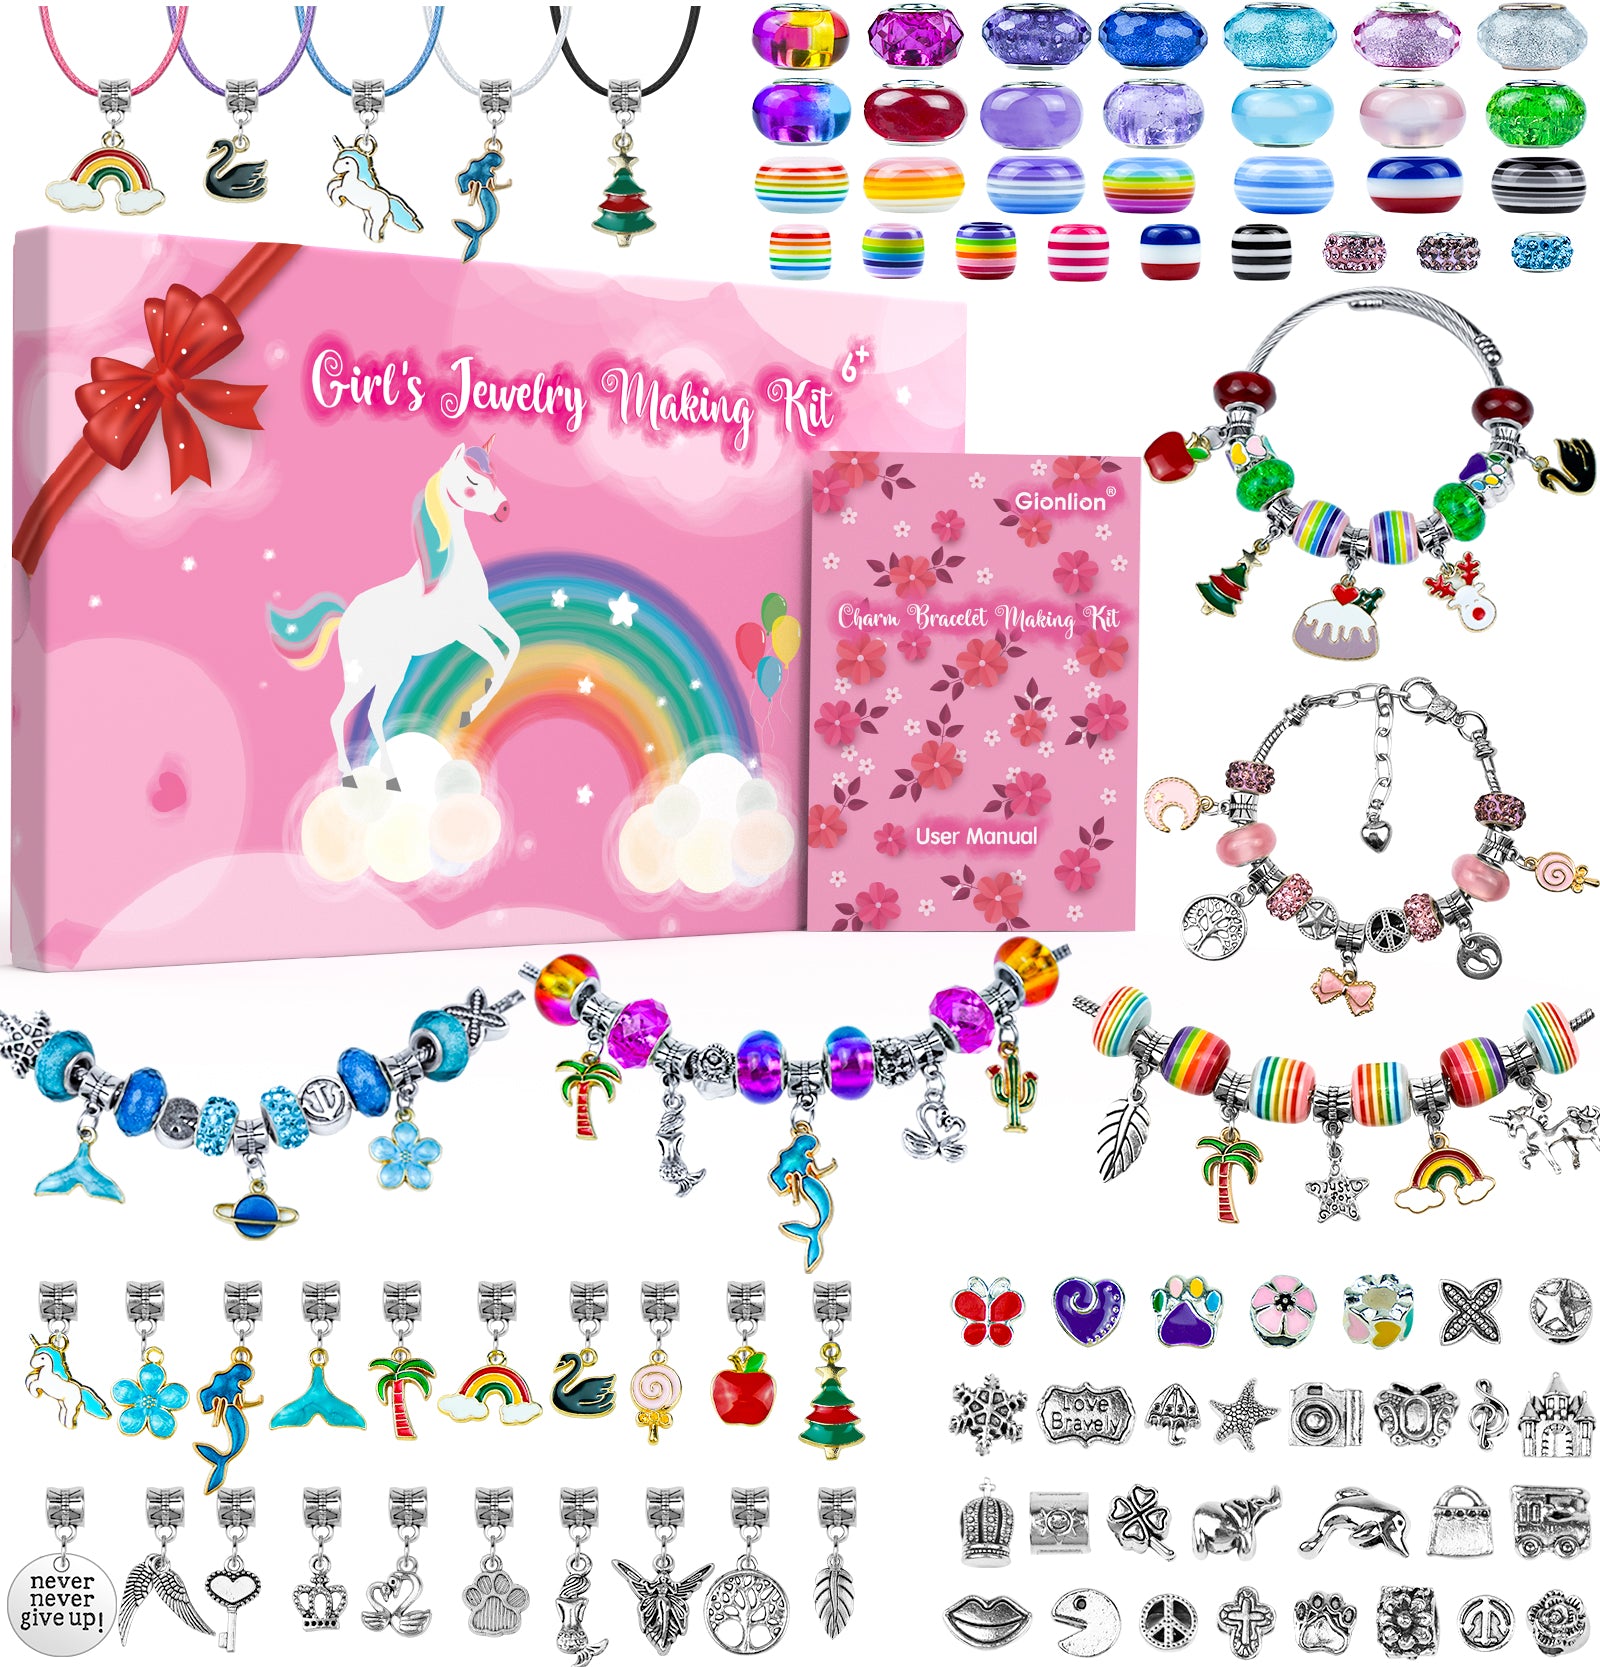 New Fashion 12 Styles Rainbow Unicorn Glass Beads Bracelets & Bangles For  Kids Girls Party Accessories Gifts